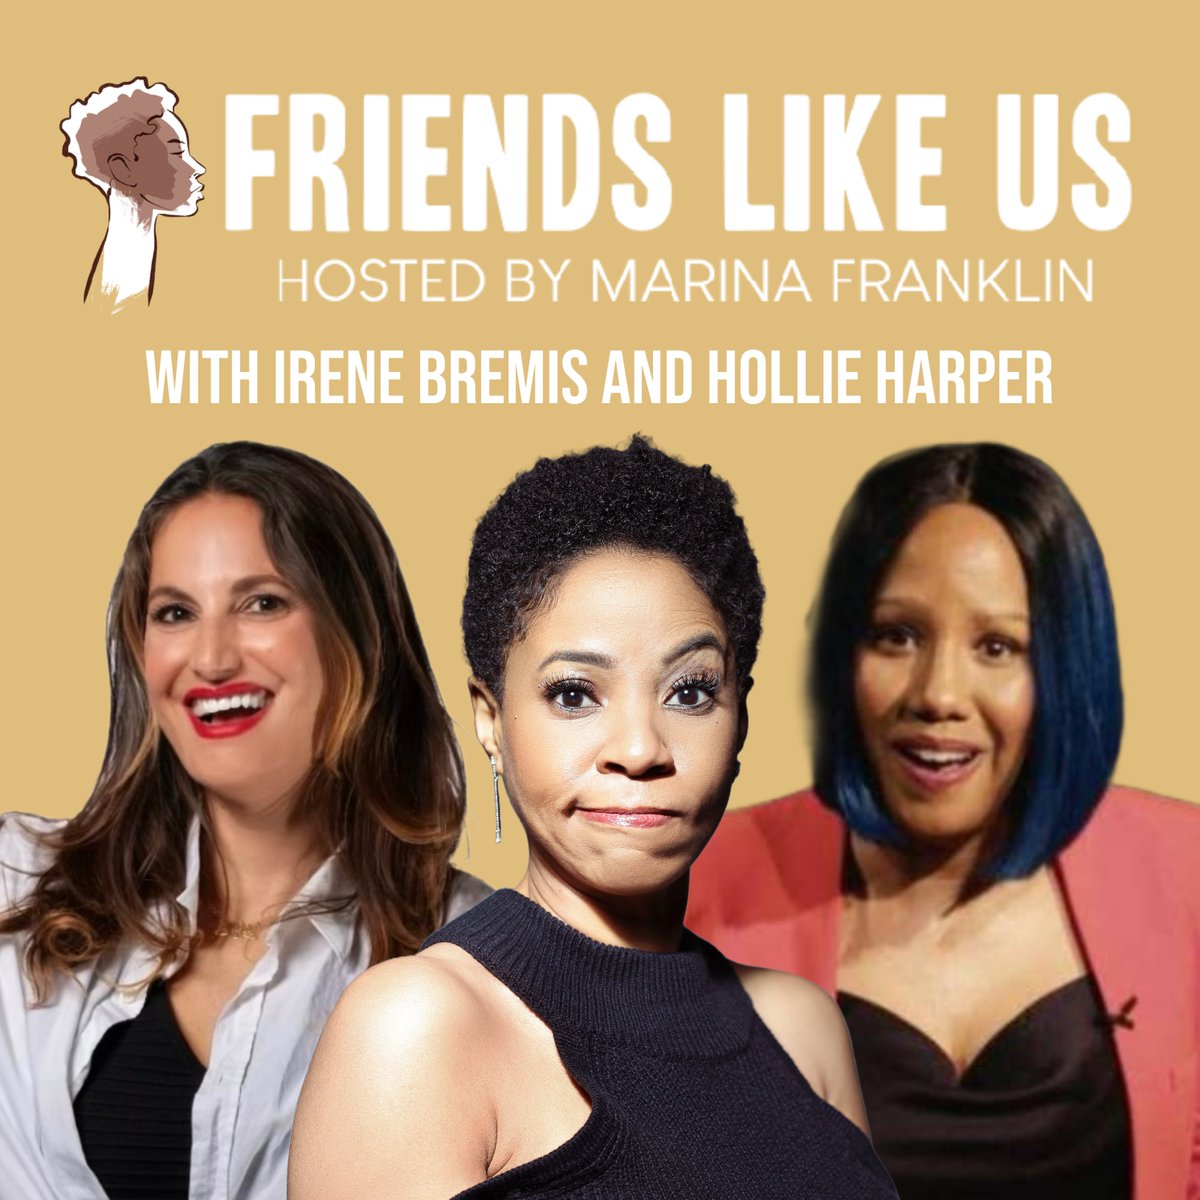 From OJ's car chase to personal stories of potential psychic abilities, dive into our latest episode! Listen to our latest episode with @marinayfranklin & friends @irenebremis13 @HollieHarper! #CheckUsOut and #Subscribe here ow.ly/29QM50K2uzY Review #FLU on #ApplePodcasts!